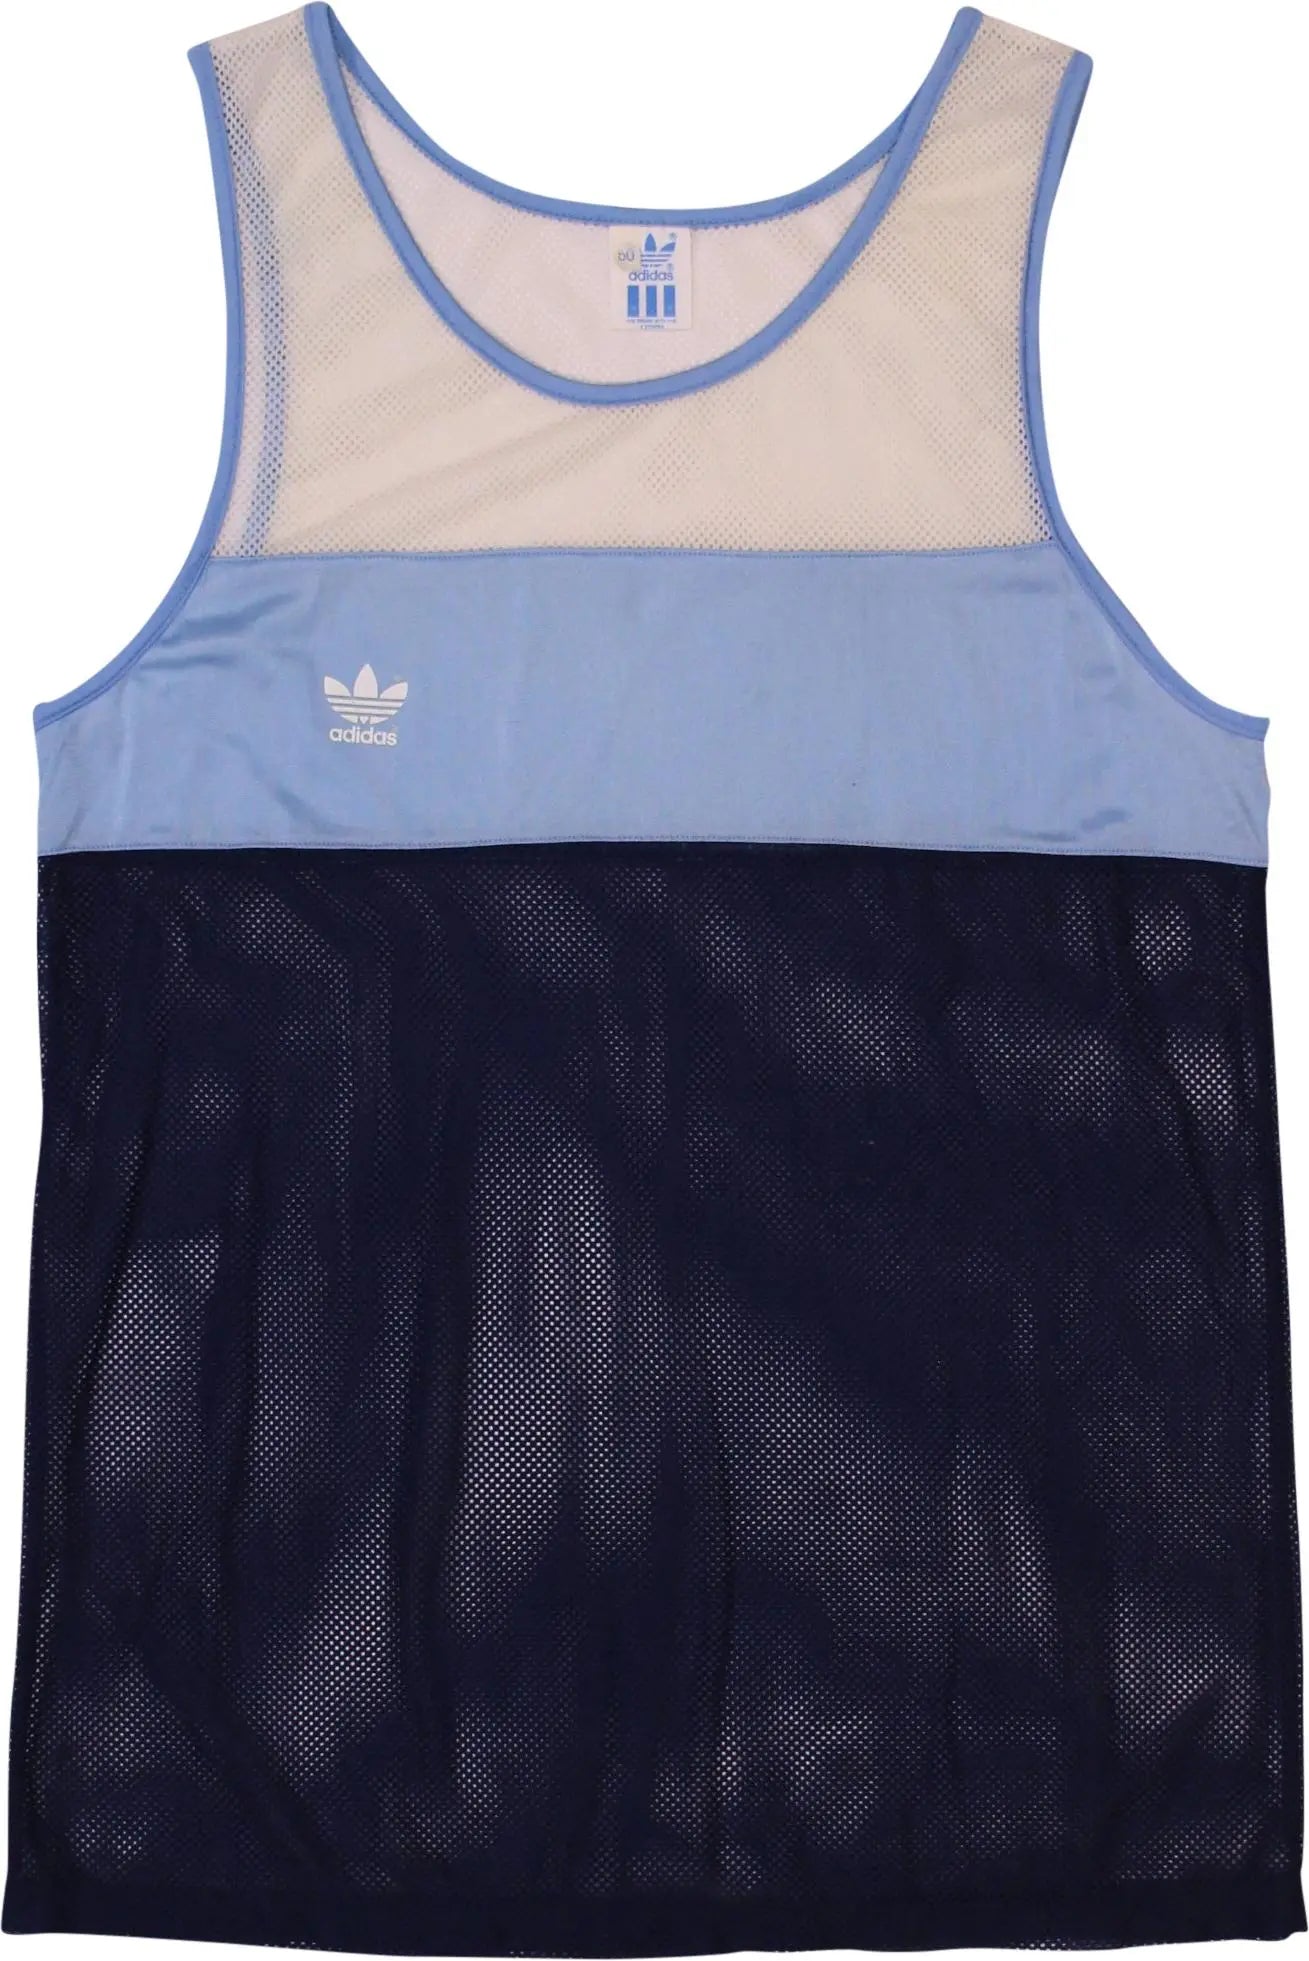 Adidas - 80s Mesh Tank Top by Adidas- ThriftTale.com - Vintage and second handclothing